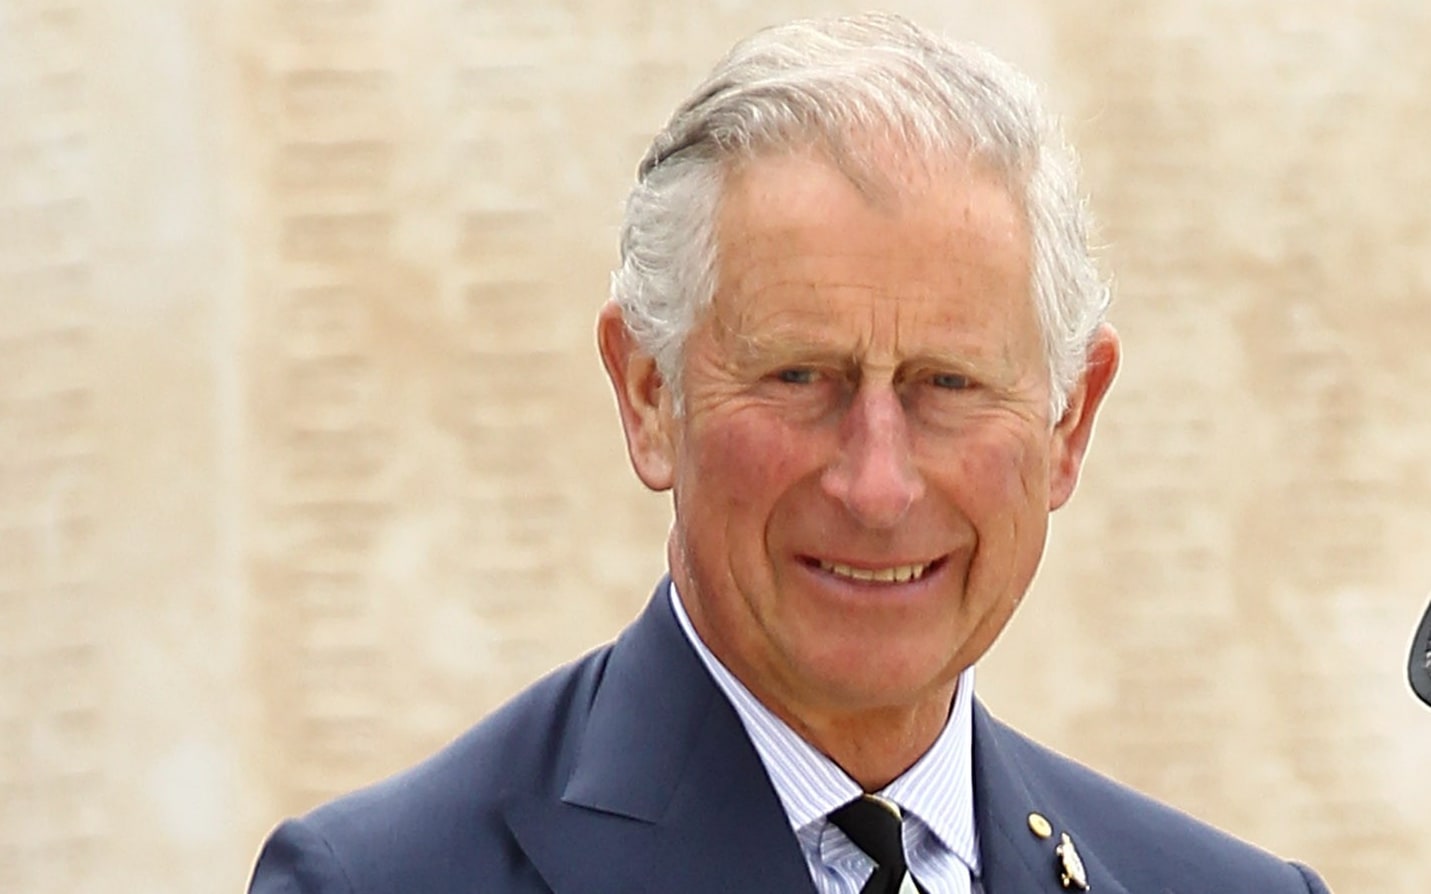 Prince Charles at a commemorative ceremony on the 100th Anniversary of the Canakkale Land Battles on Gallipoli Peninsula, in Canakkale, Turkey on April 25, 2015.